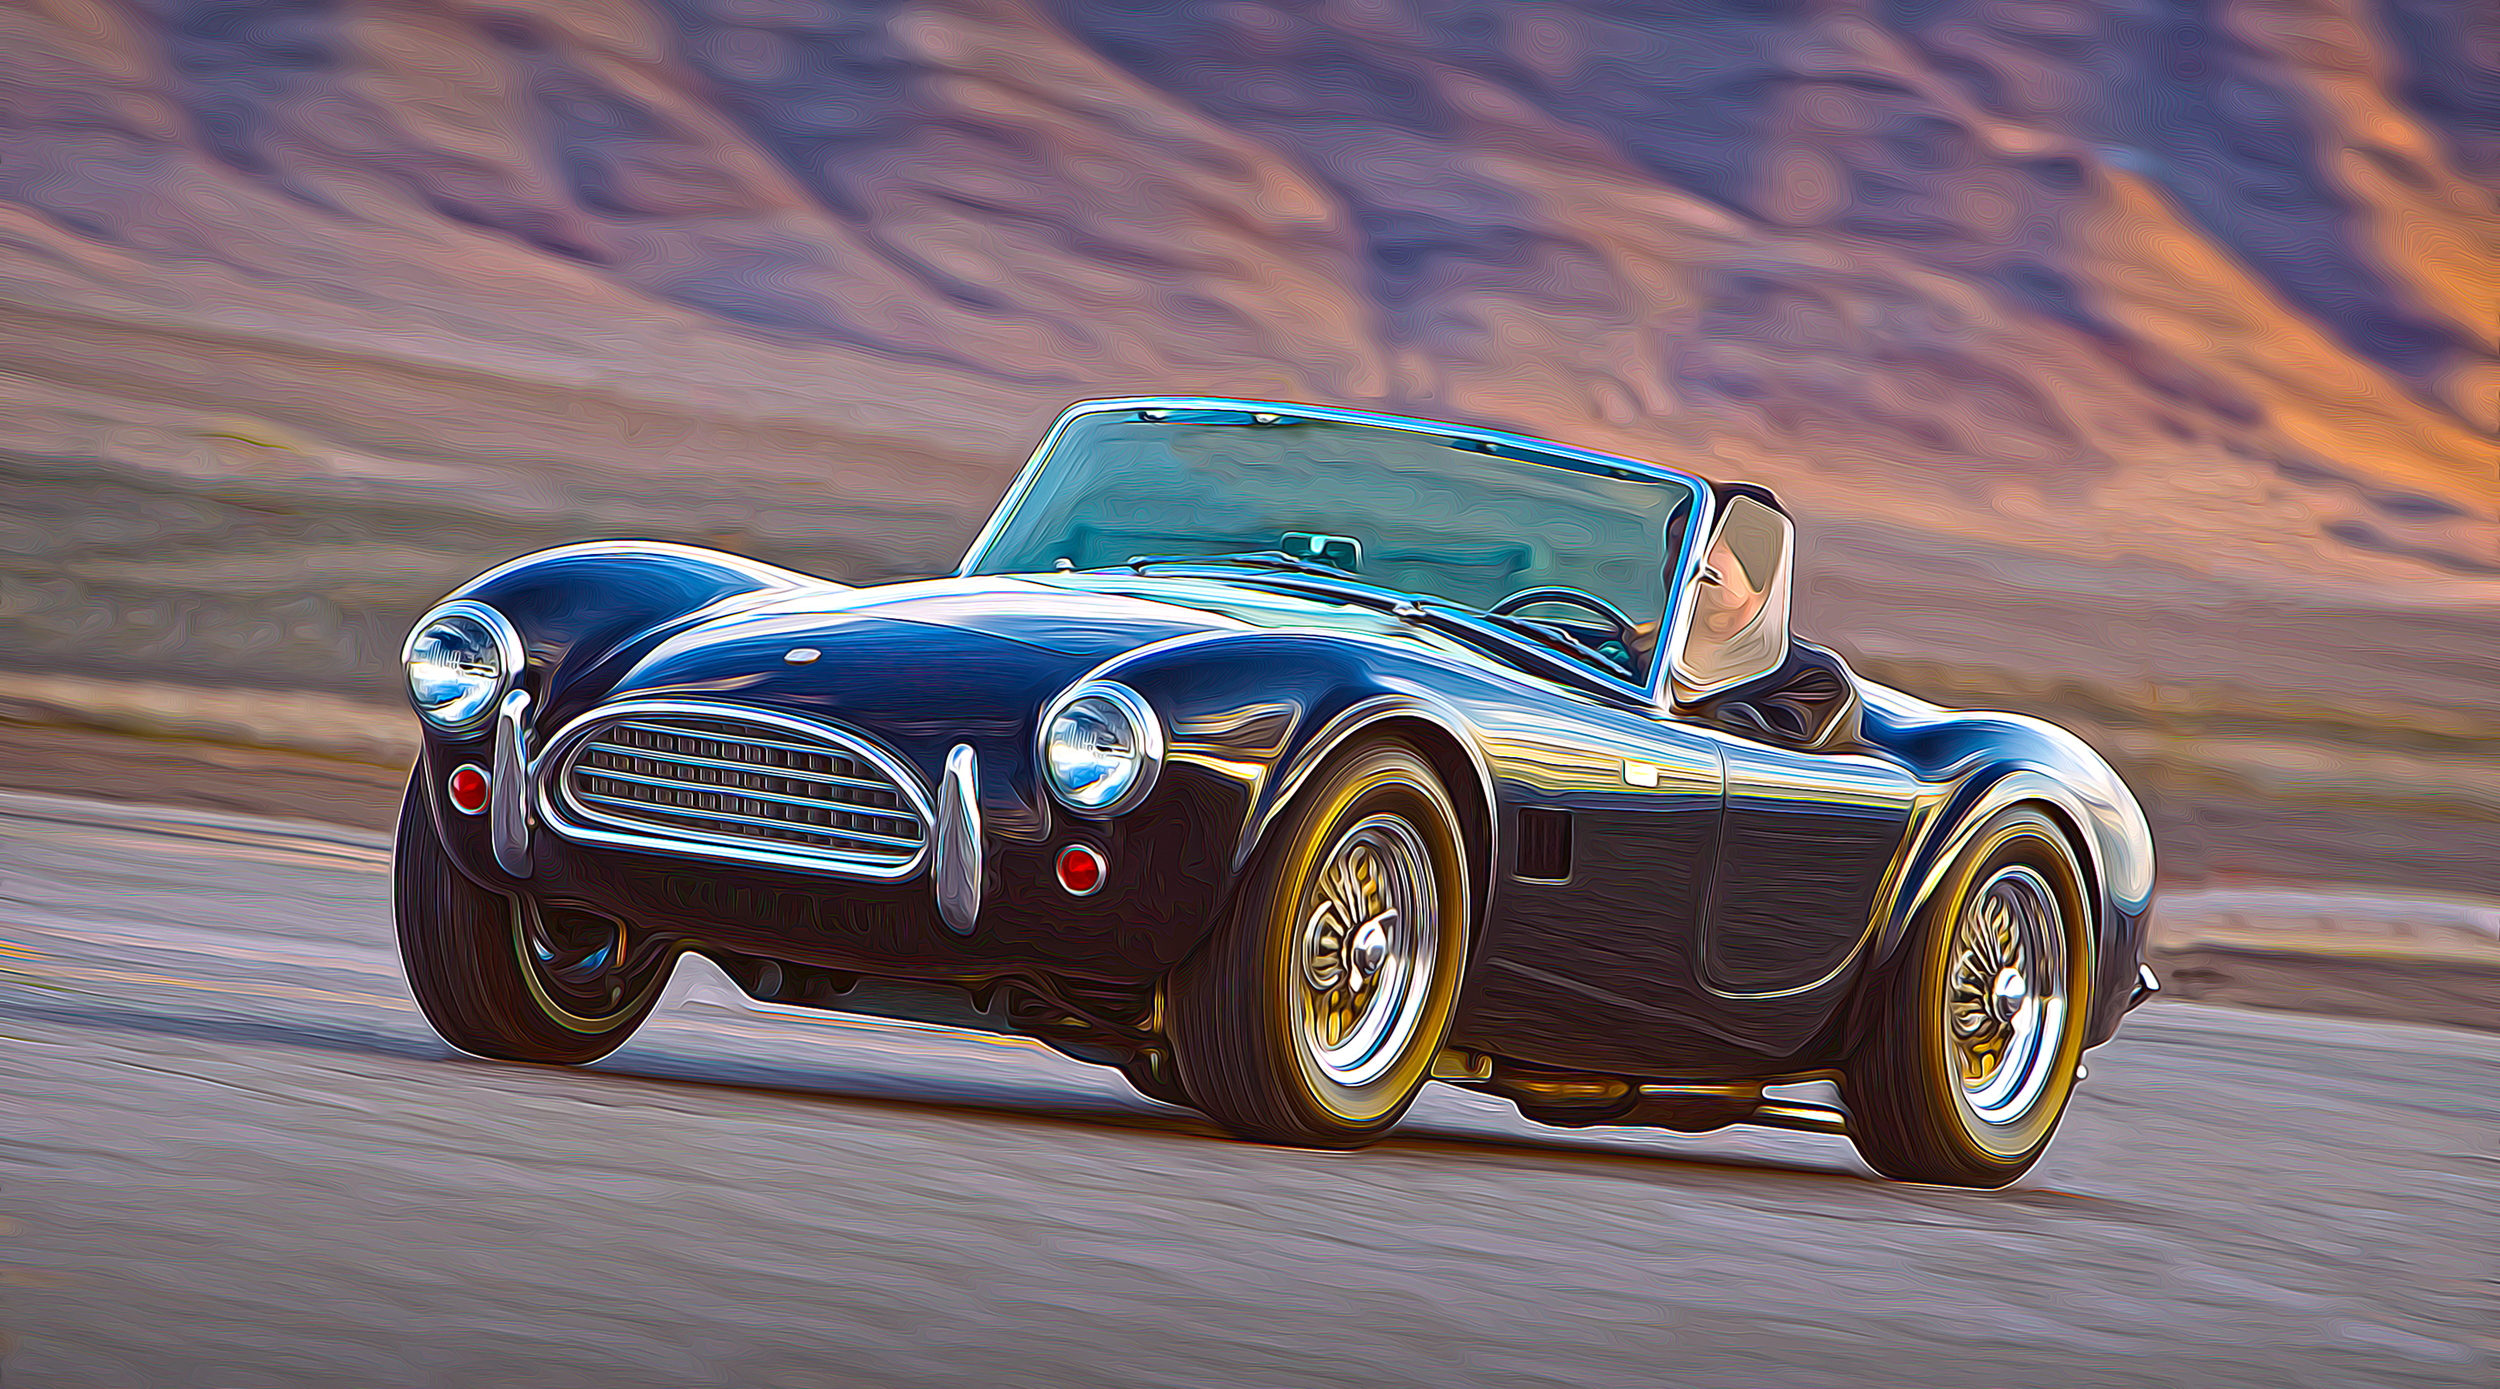   50th Anniversary Cobra in Action  